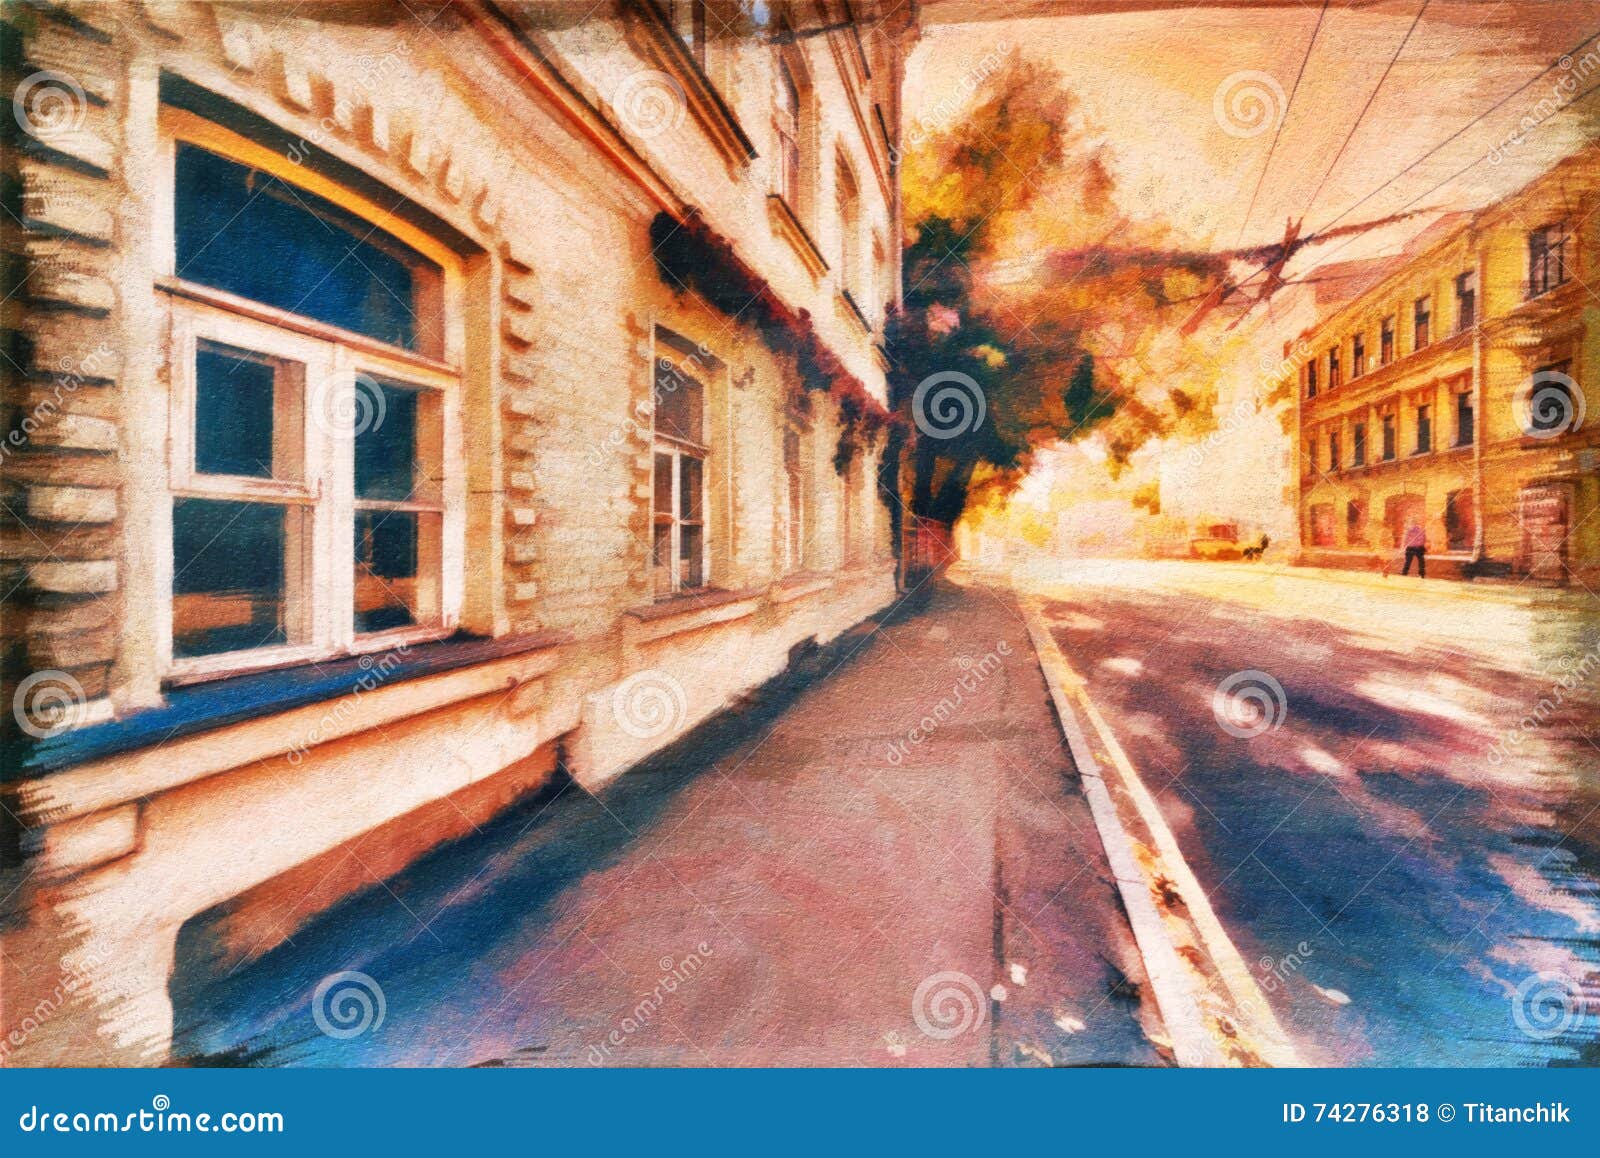 art painting style- old street in the modern city